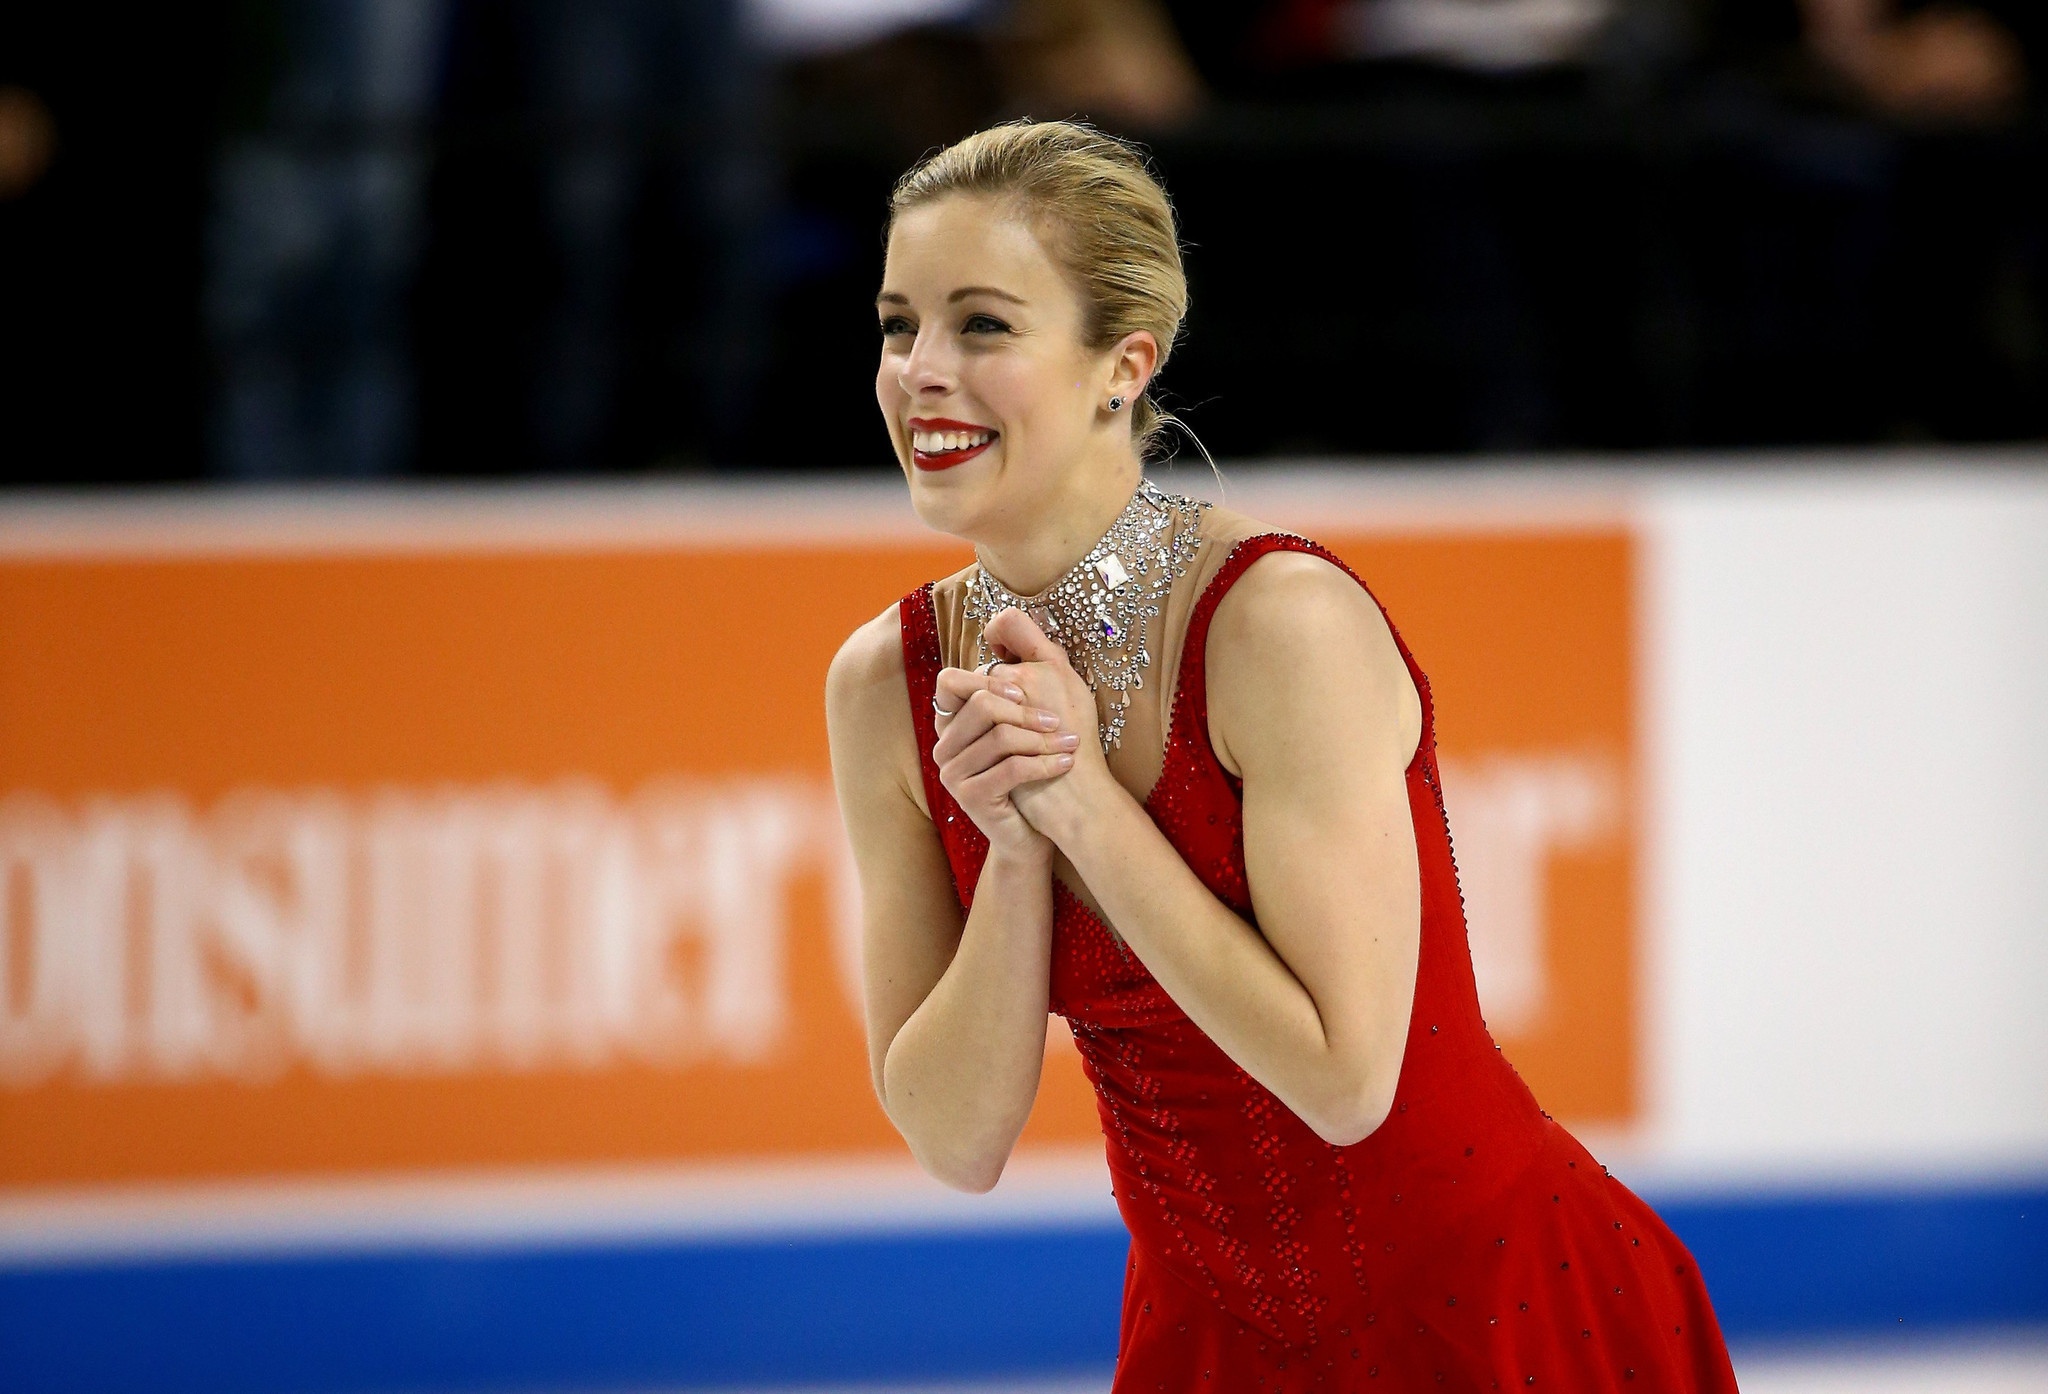 Ashley Wagner easily outdoes Gracie Gold to seize U.S. championship - Chicago Tribune2048 x 1394